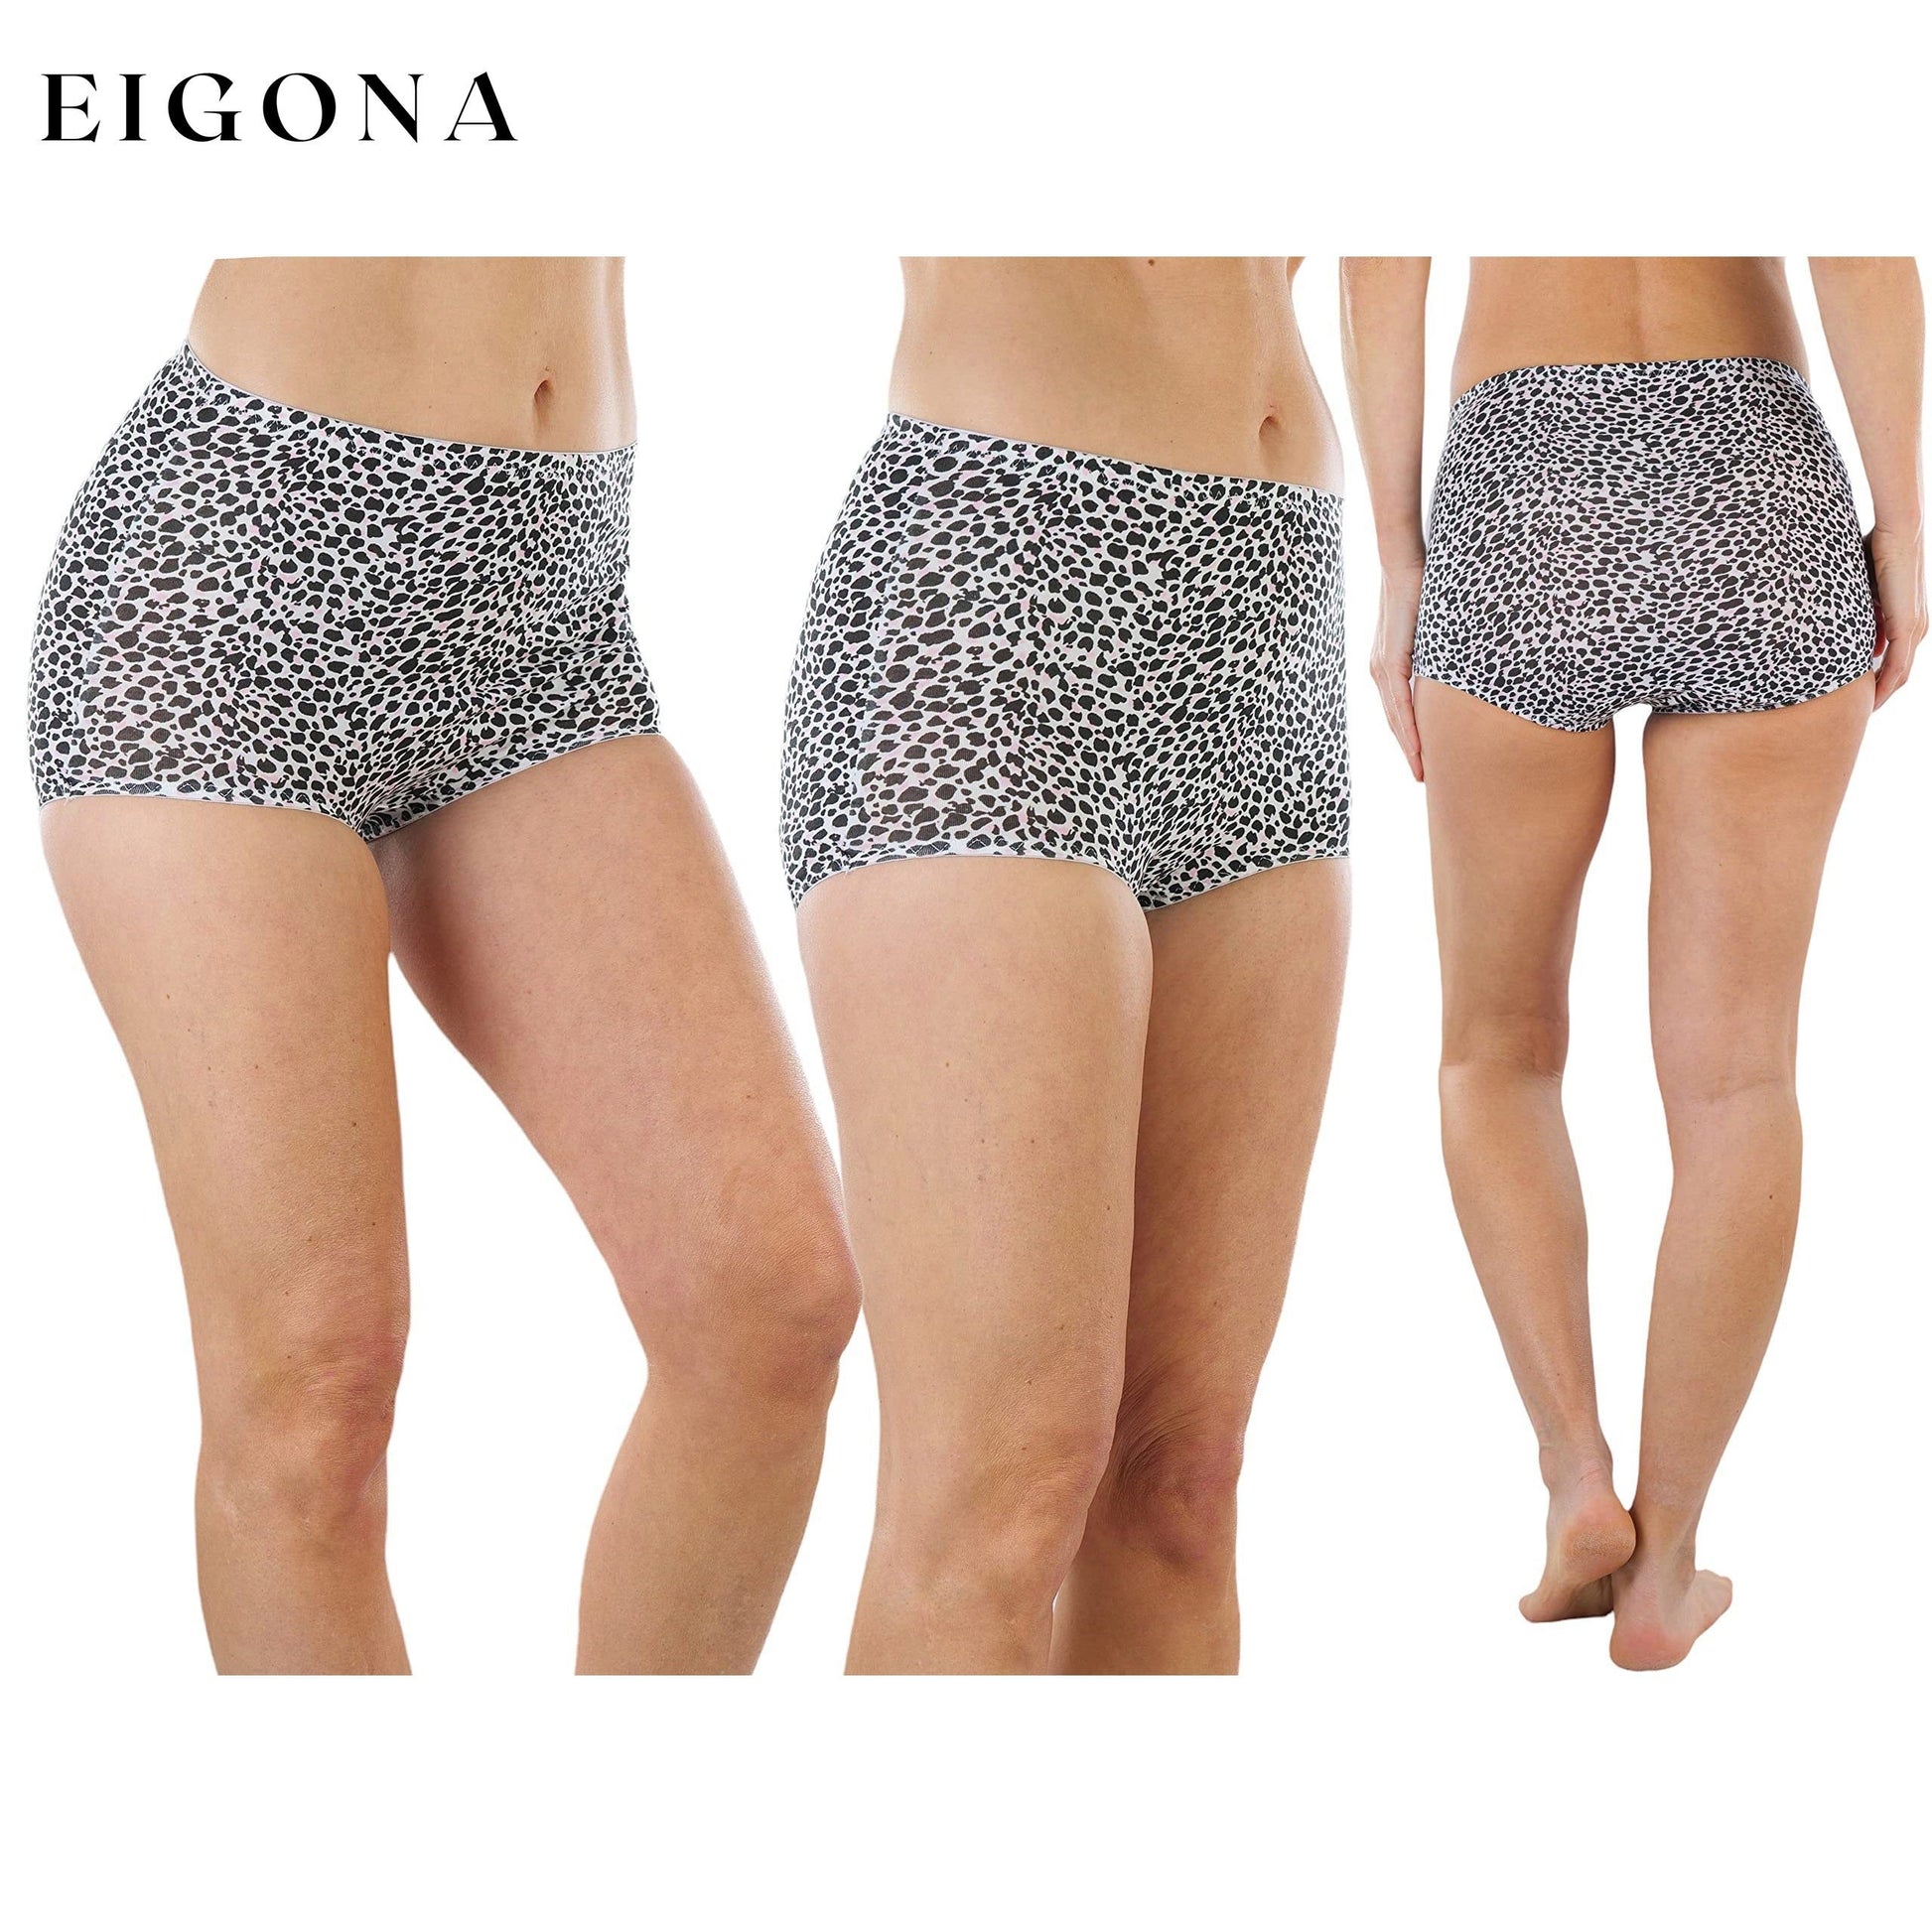 6-Pack: Women's High Waisted Pink Solids and Patterned Gridle Panties __stock:100 lingerie refund_fee:1200